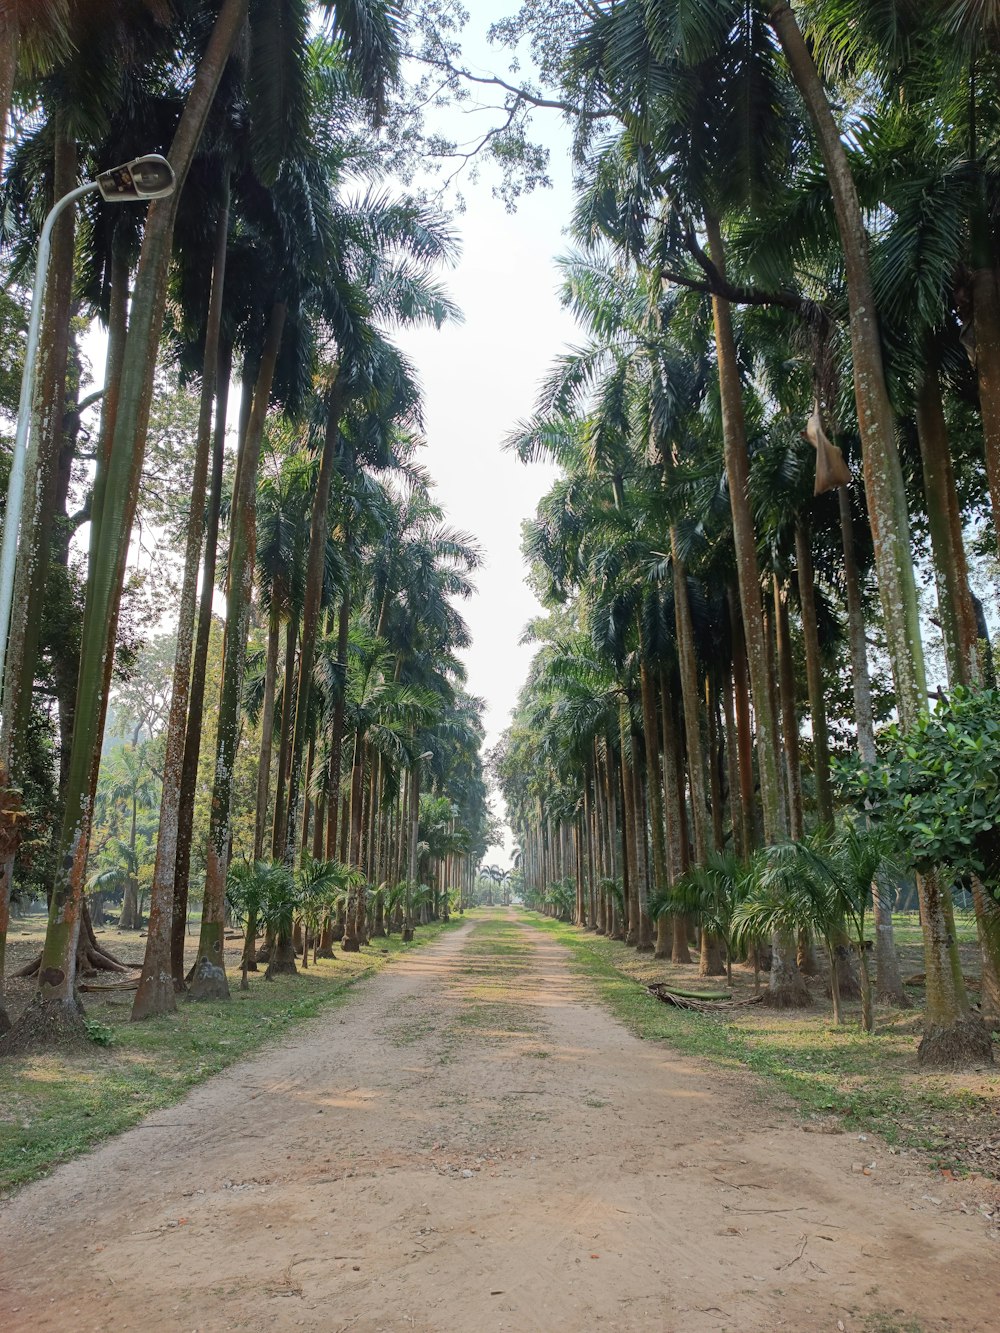 a dirt road surrounded by tall palm trees